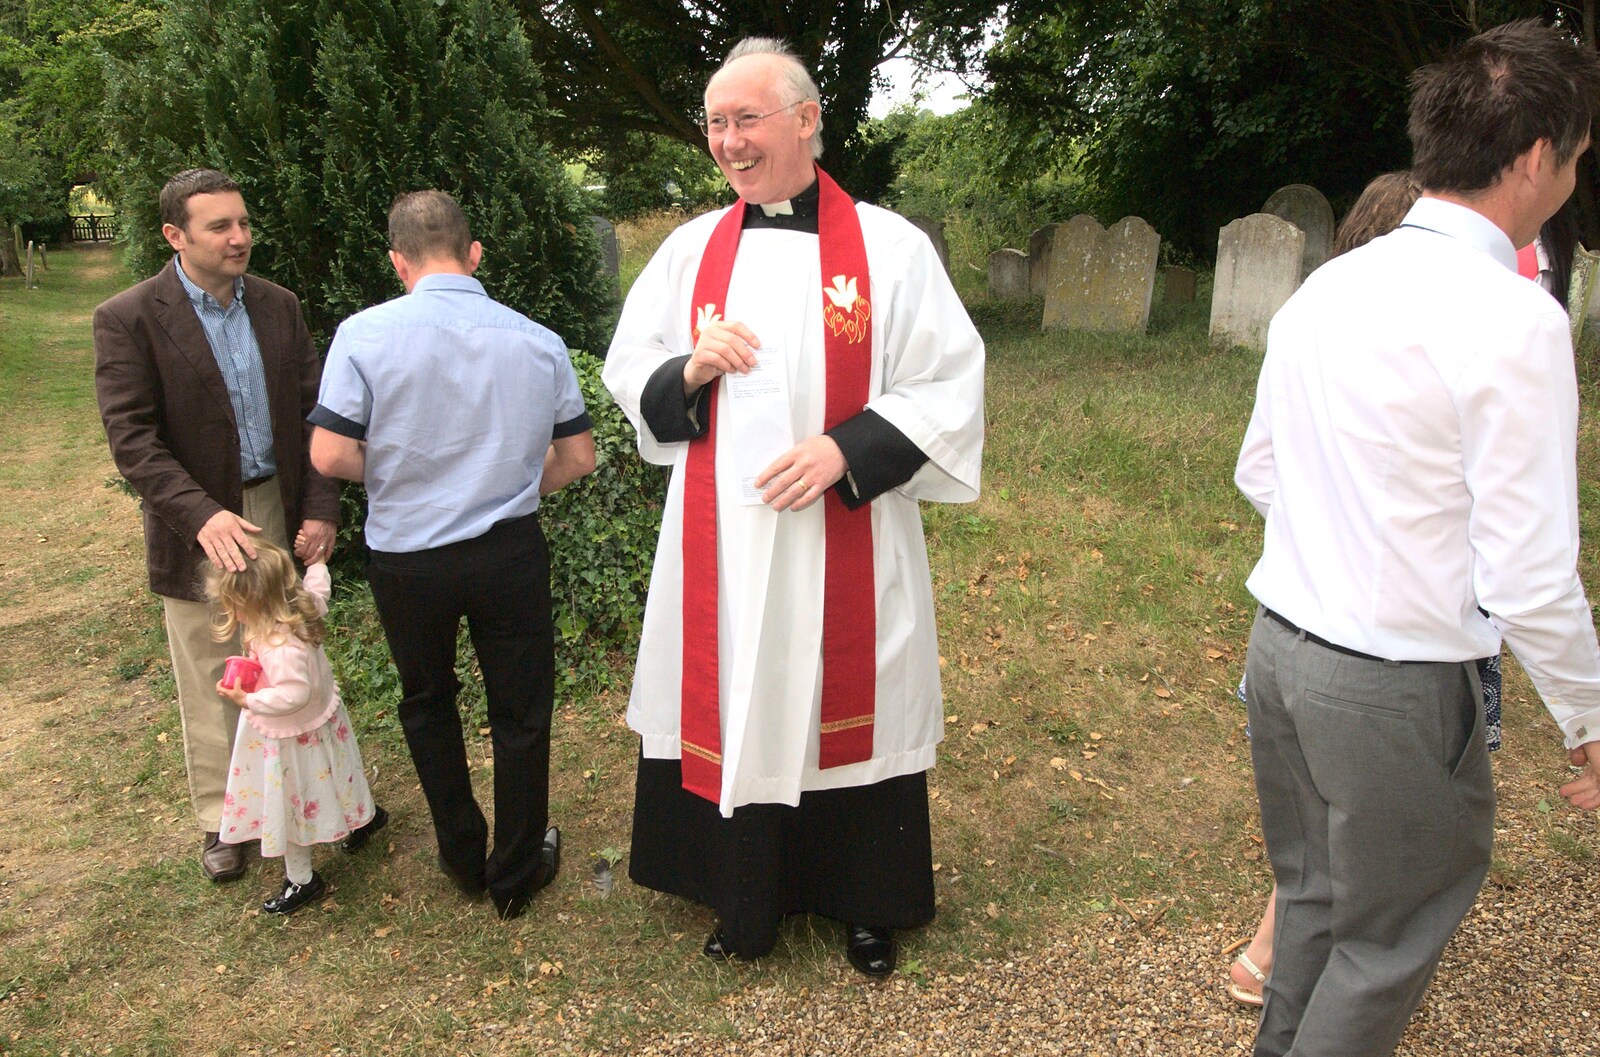 The reverend Thompson outside the church from A Christening at St. Mary's Church, Wortham, Suffolk - 12th June 2011